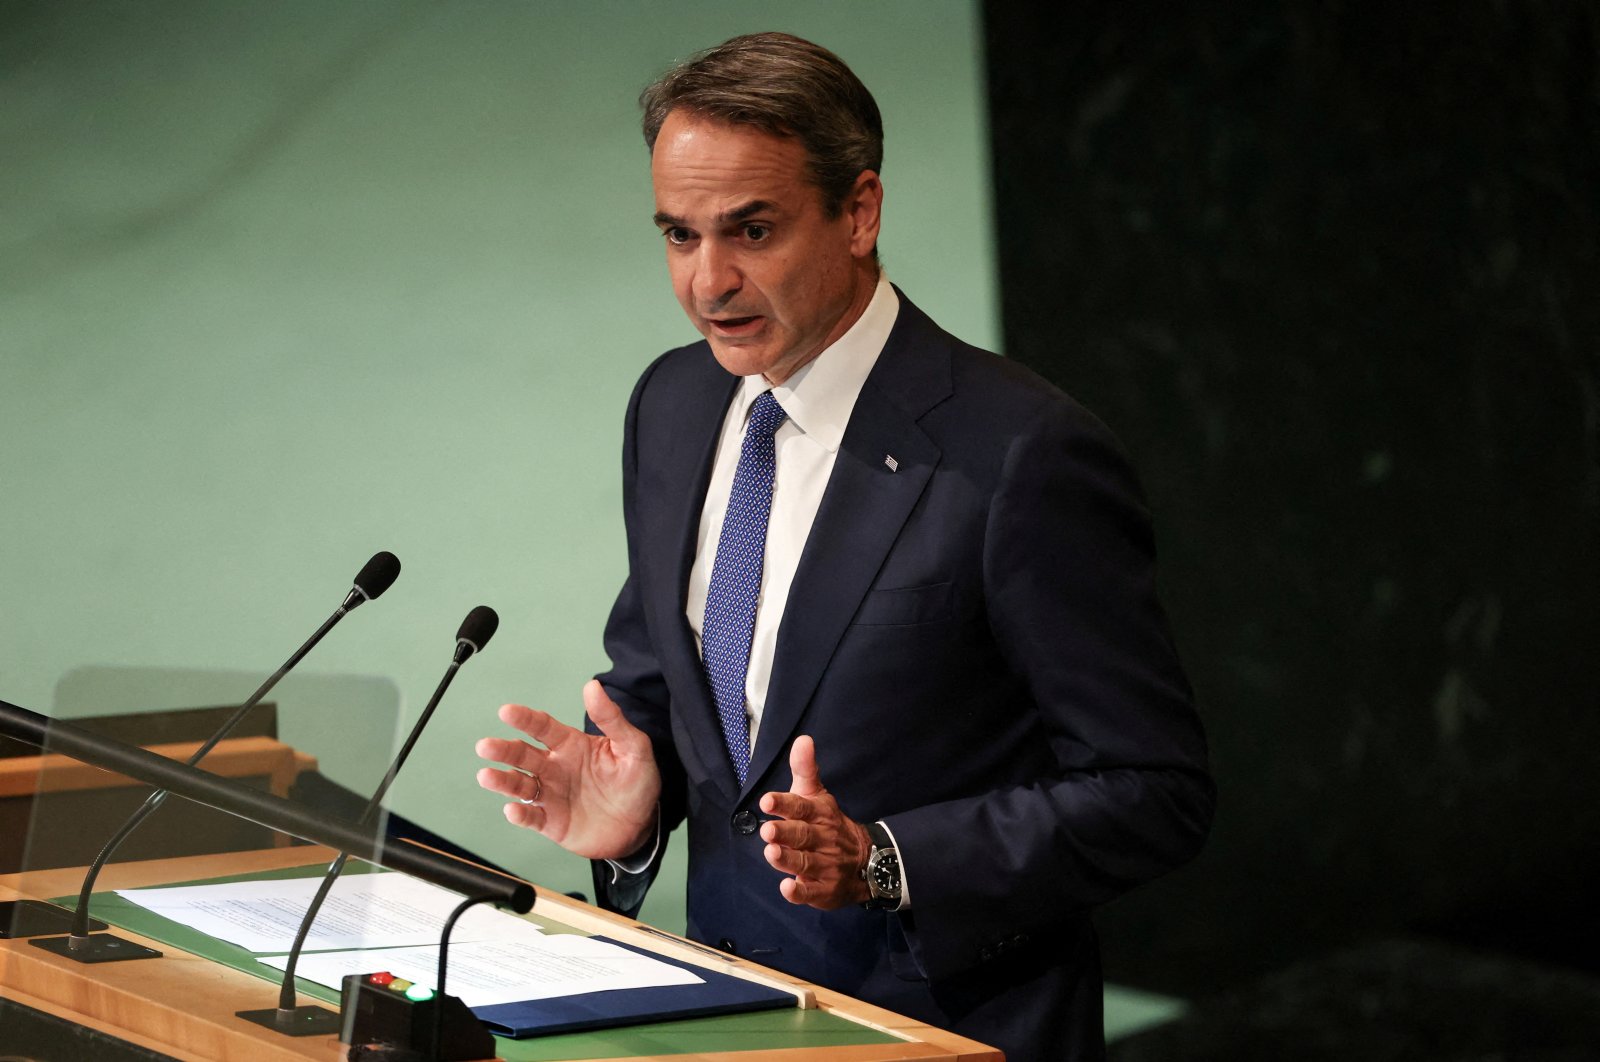 Greek Prime Minister Kyriakos Mitsotakis addresses the 77th United Nations General Assembly at U.N. headquarters in New York City, New York, U.S., Sept. 23, 2022. (Reuters File Photo)